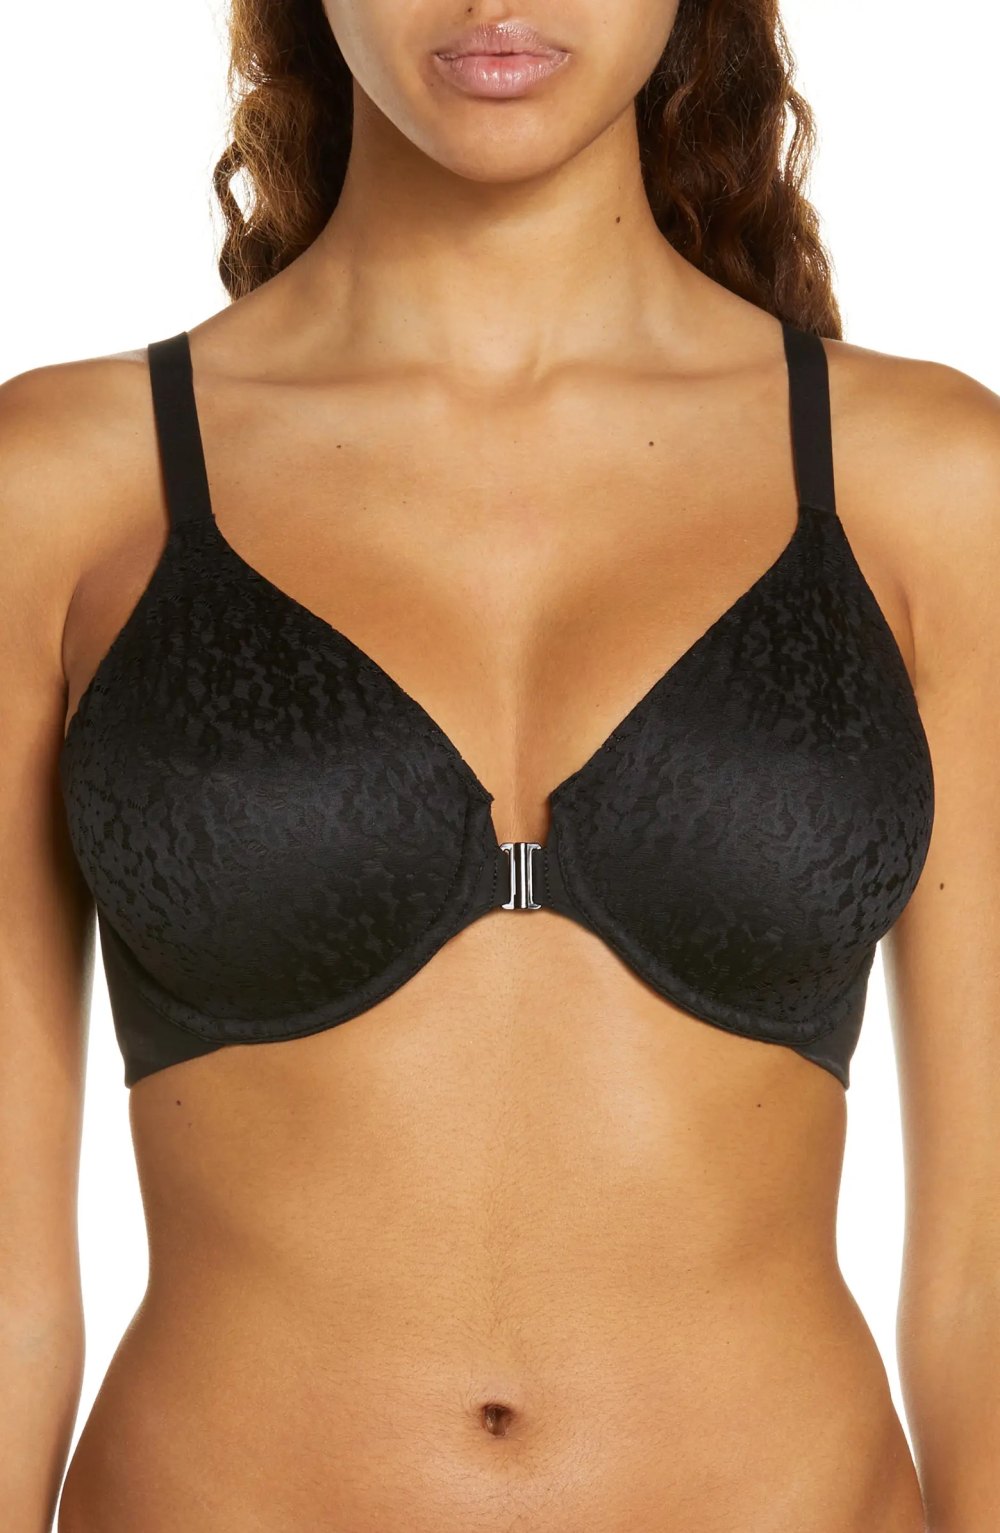 Reviewers With Larger Busts Say This Front-Closure Bra Is So Easy